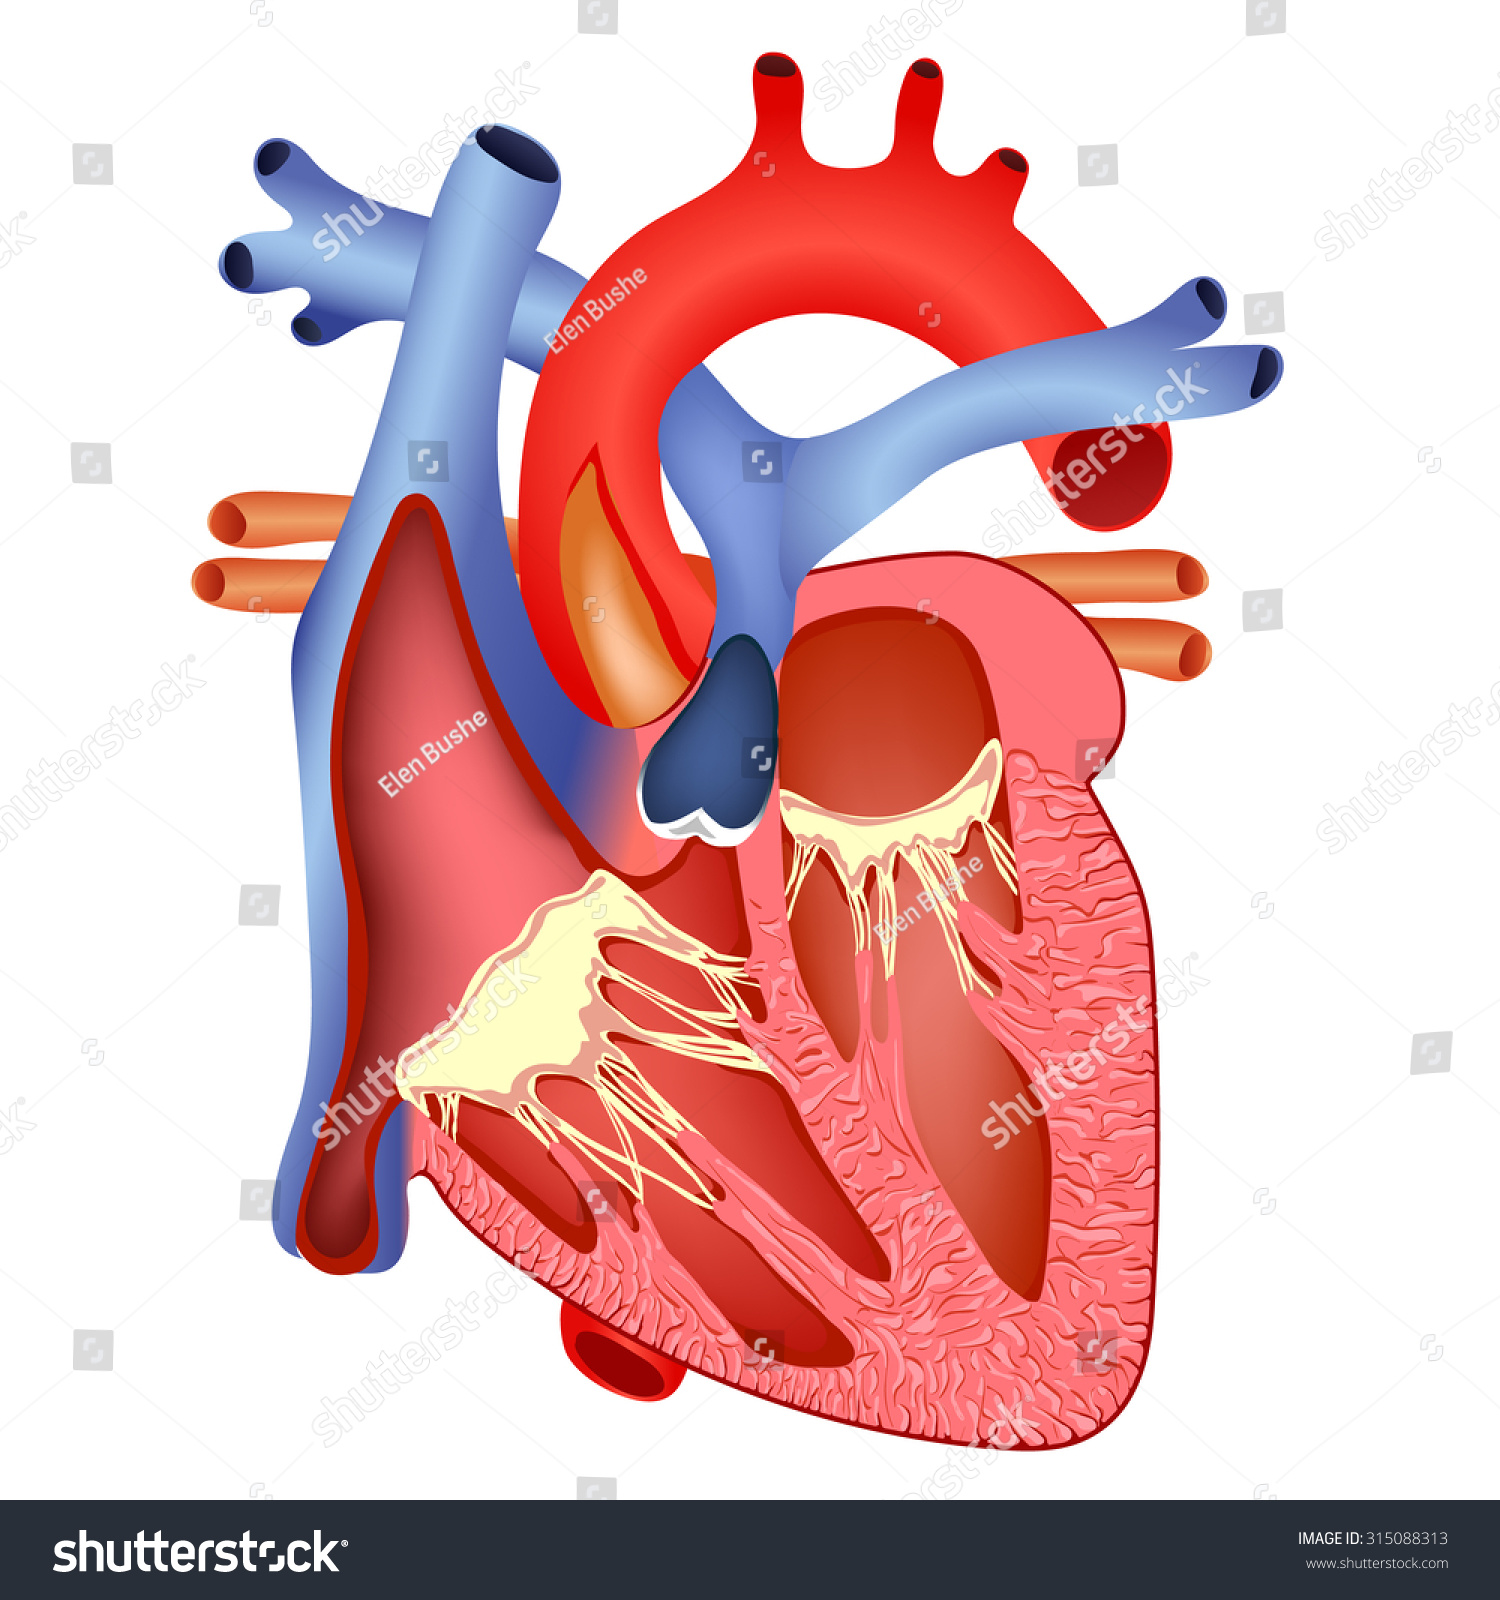 The Anatomical Structure Of Human Heart Stock Vector Illustration ...